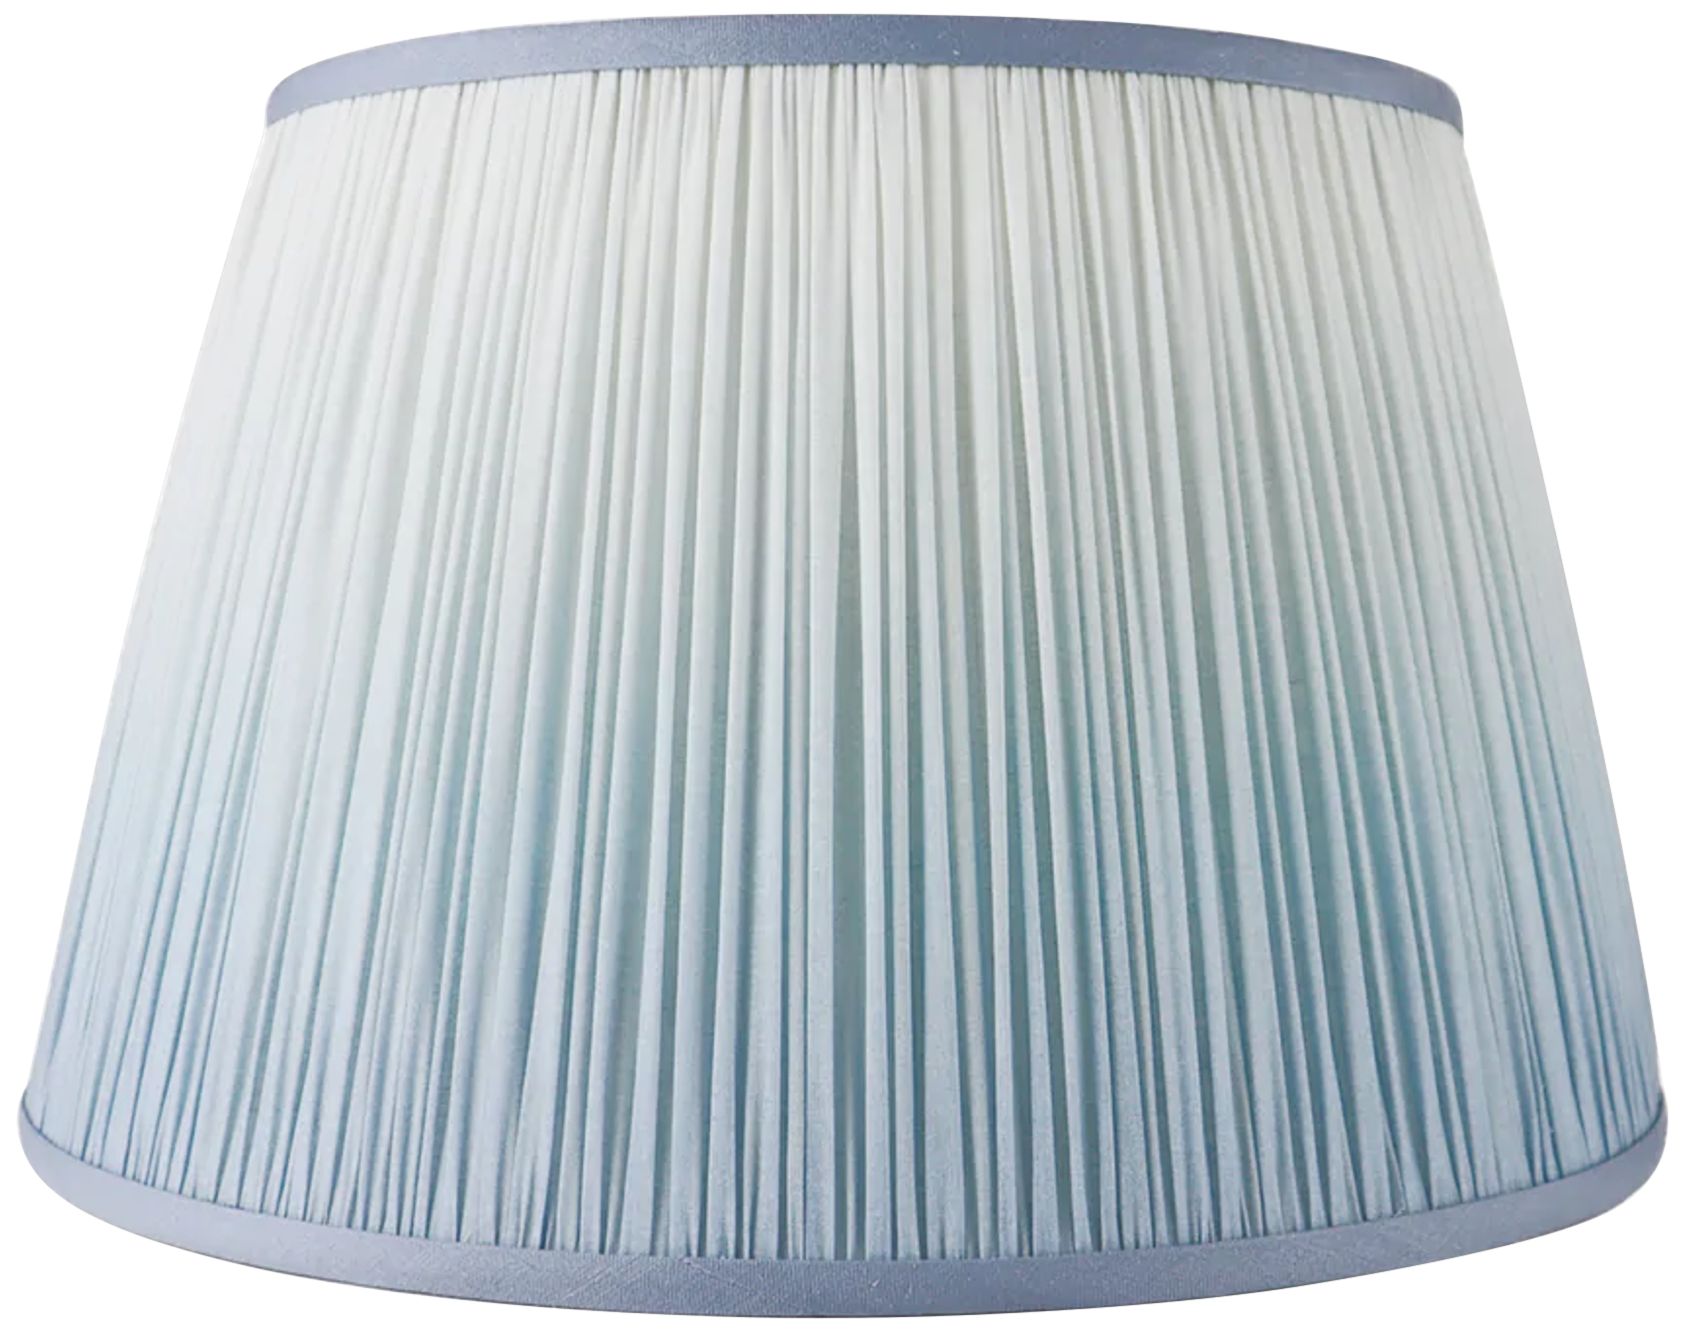 Blue Ombre Print Pleated Empire Lamp Shade 11x16x10 (Spider)